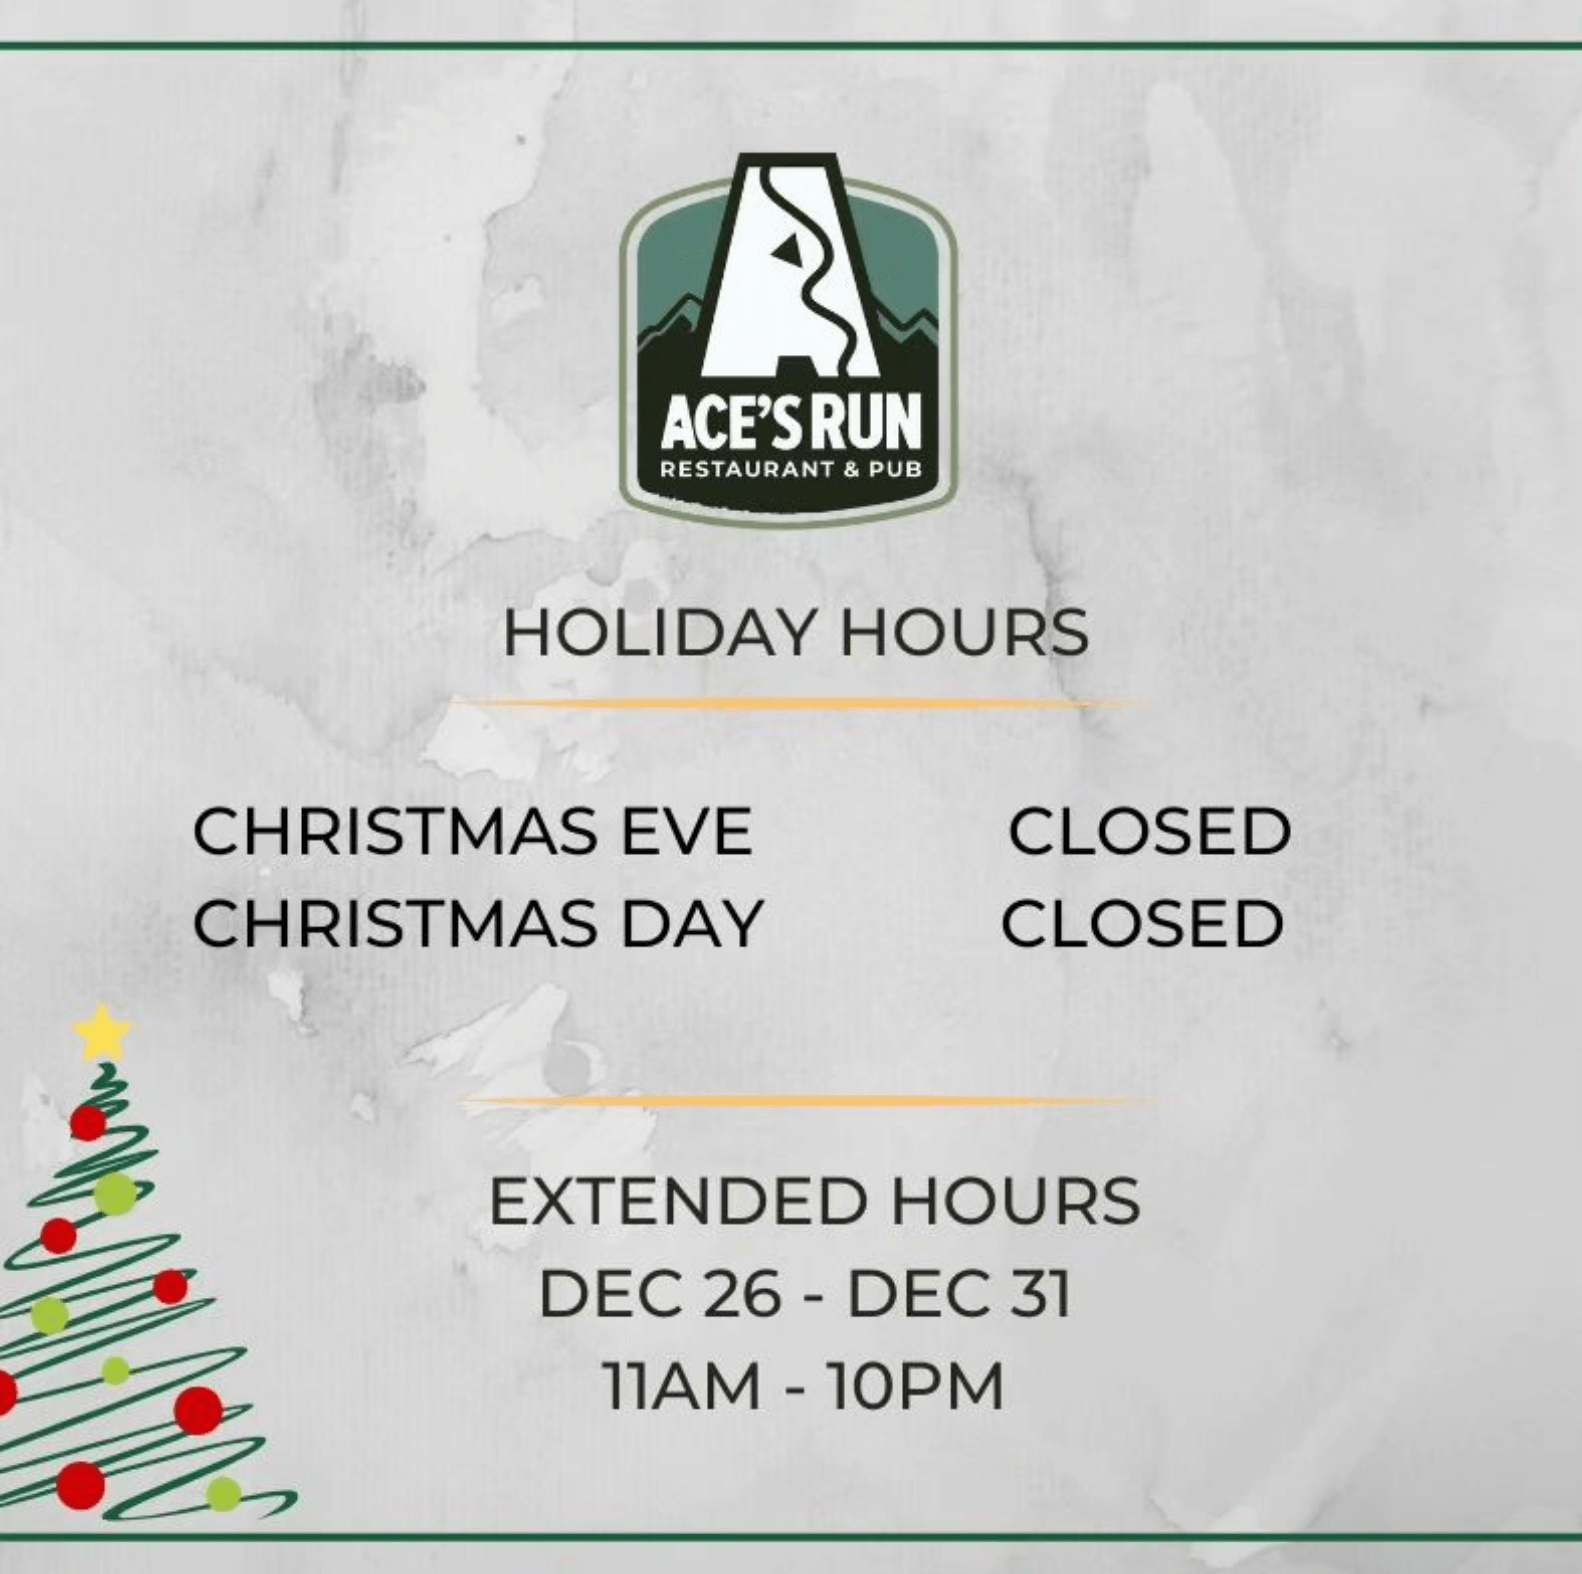 Ace's Run Restaurant & Pub - Holiday Hours at Deep Creek Lake, MD